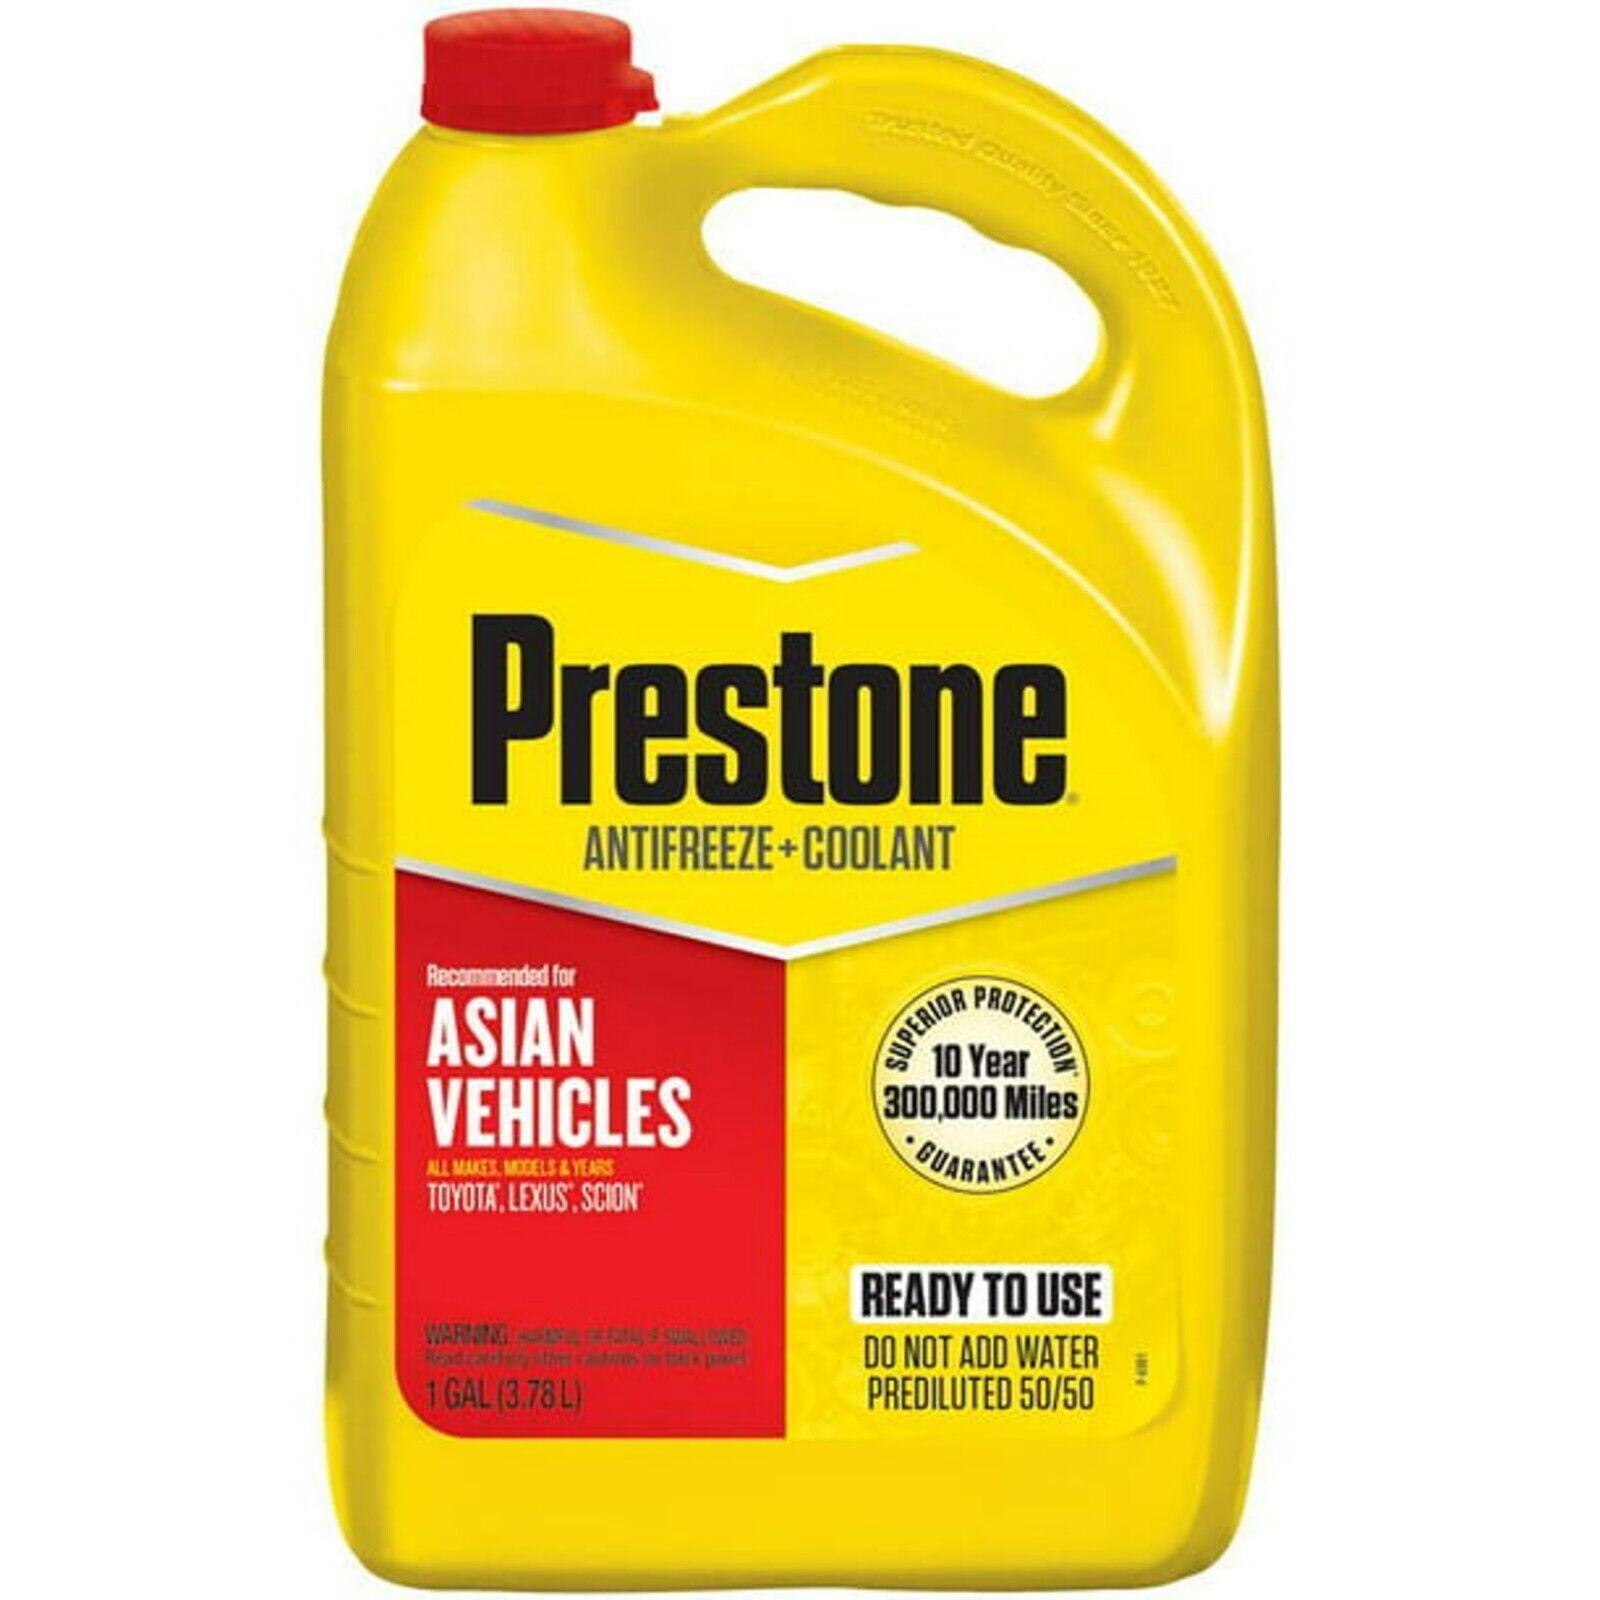 ANT AF6200 Prestone Asian Antifreeze/Coolant Prediluted 50/50 (Red, 1 Gal)